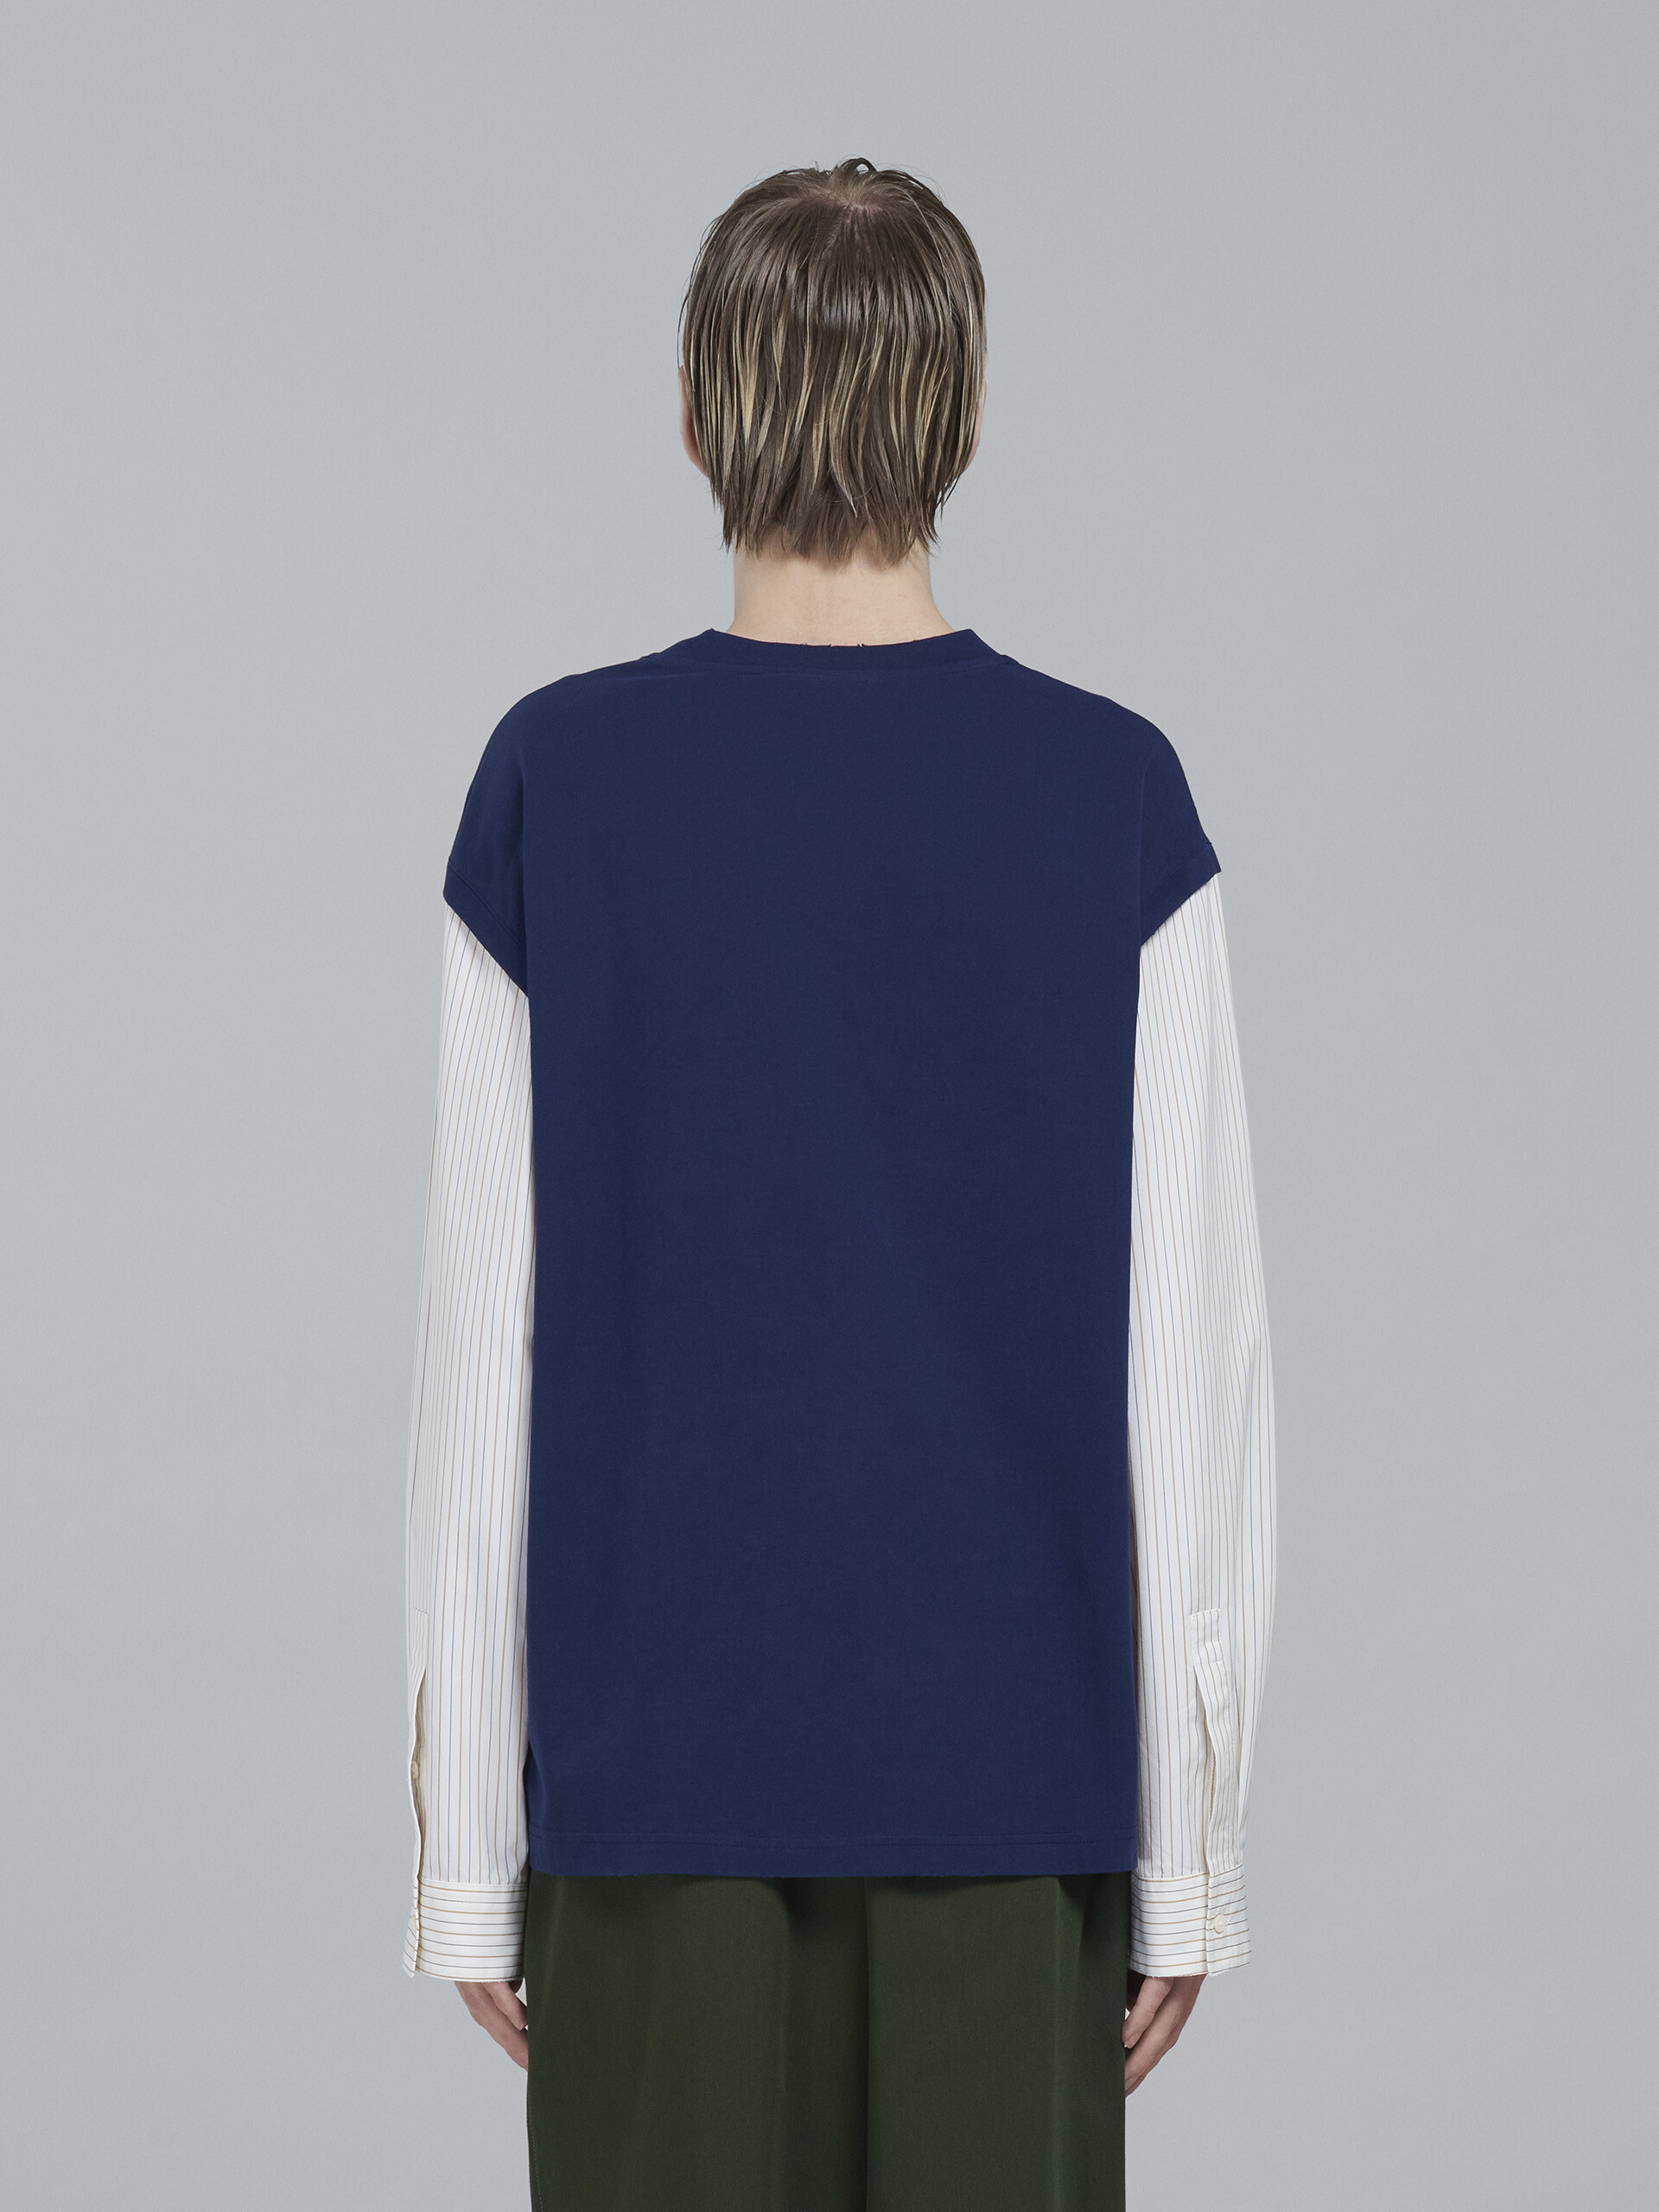 Blue jersey T-shirt with striped poplin sleeves - T-shirts - Image 3